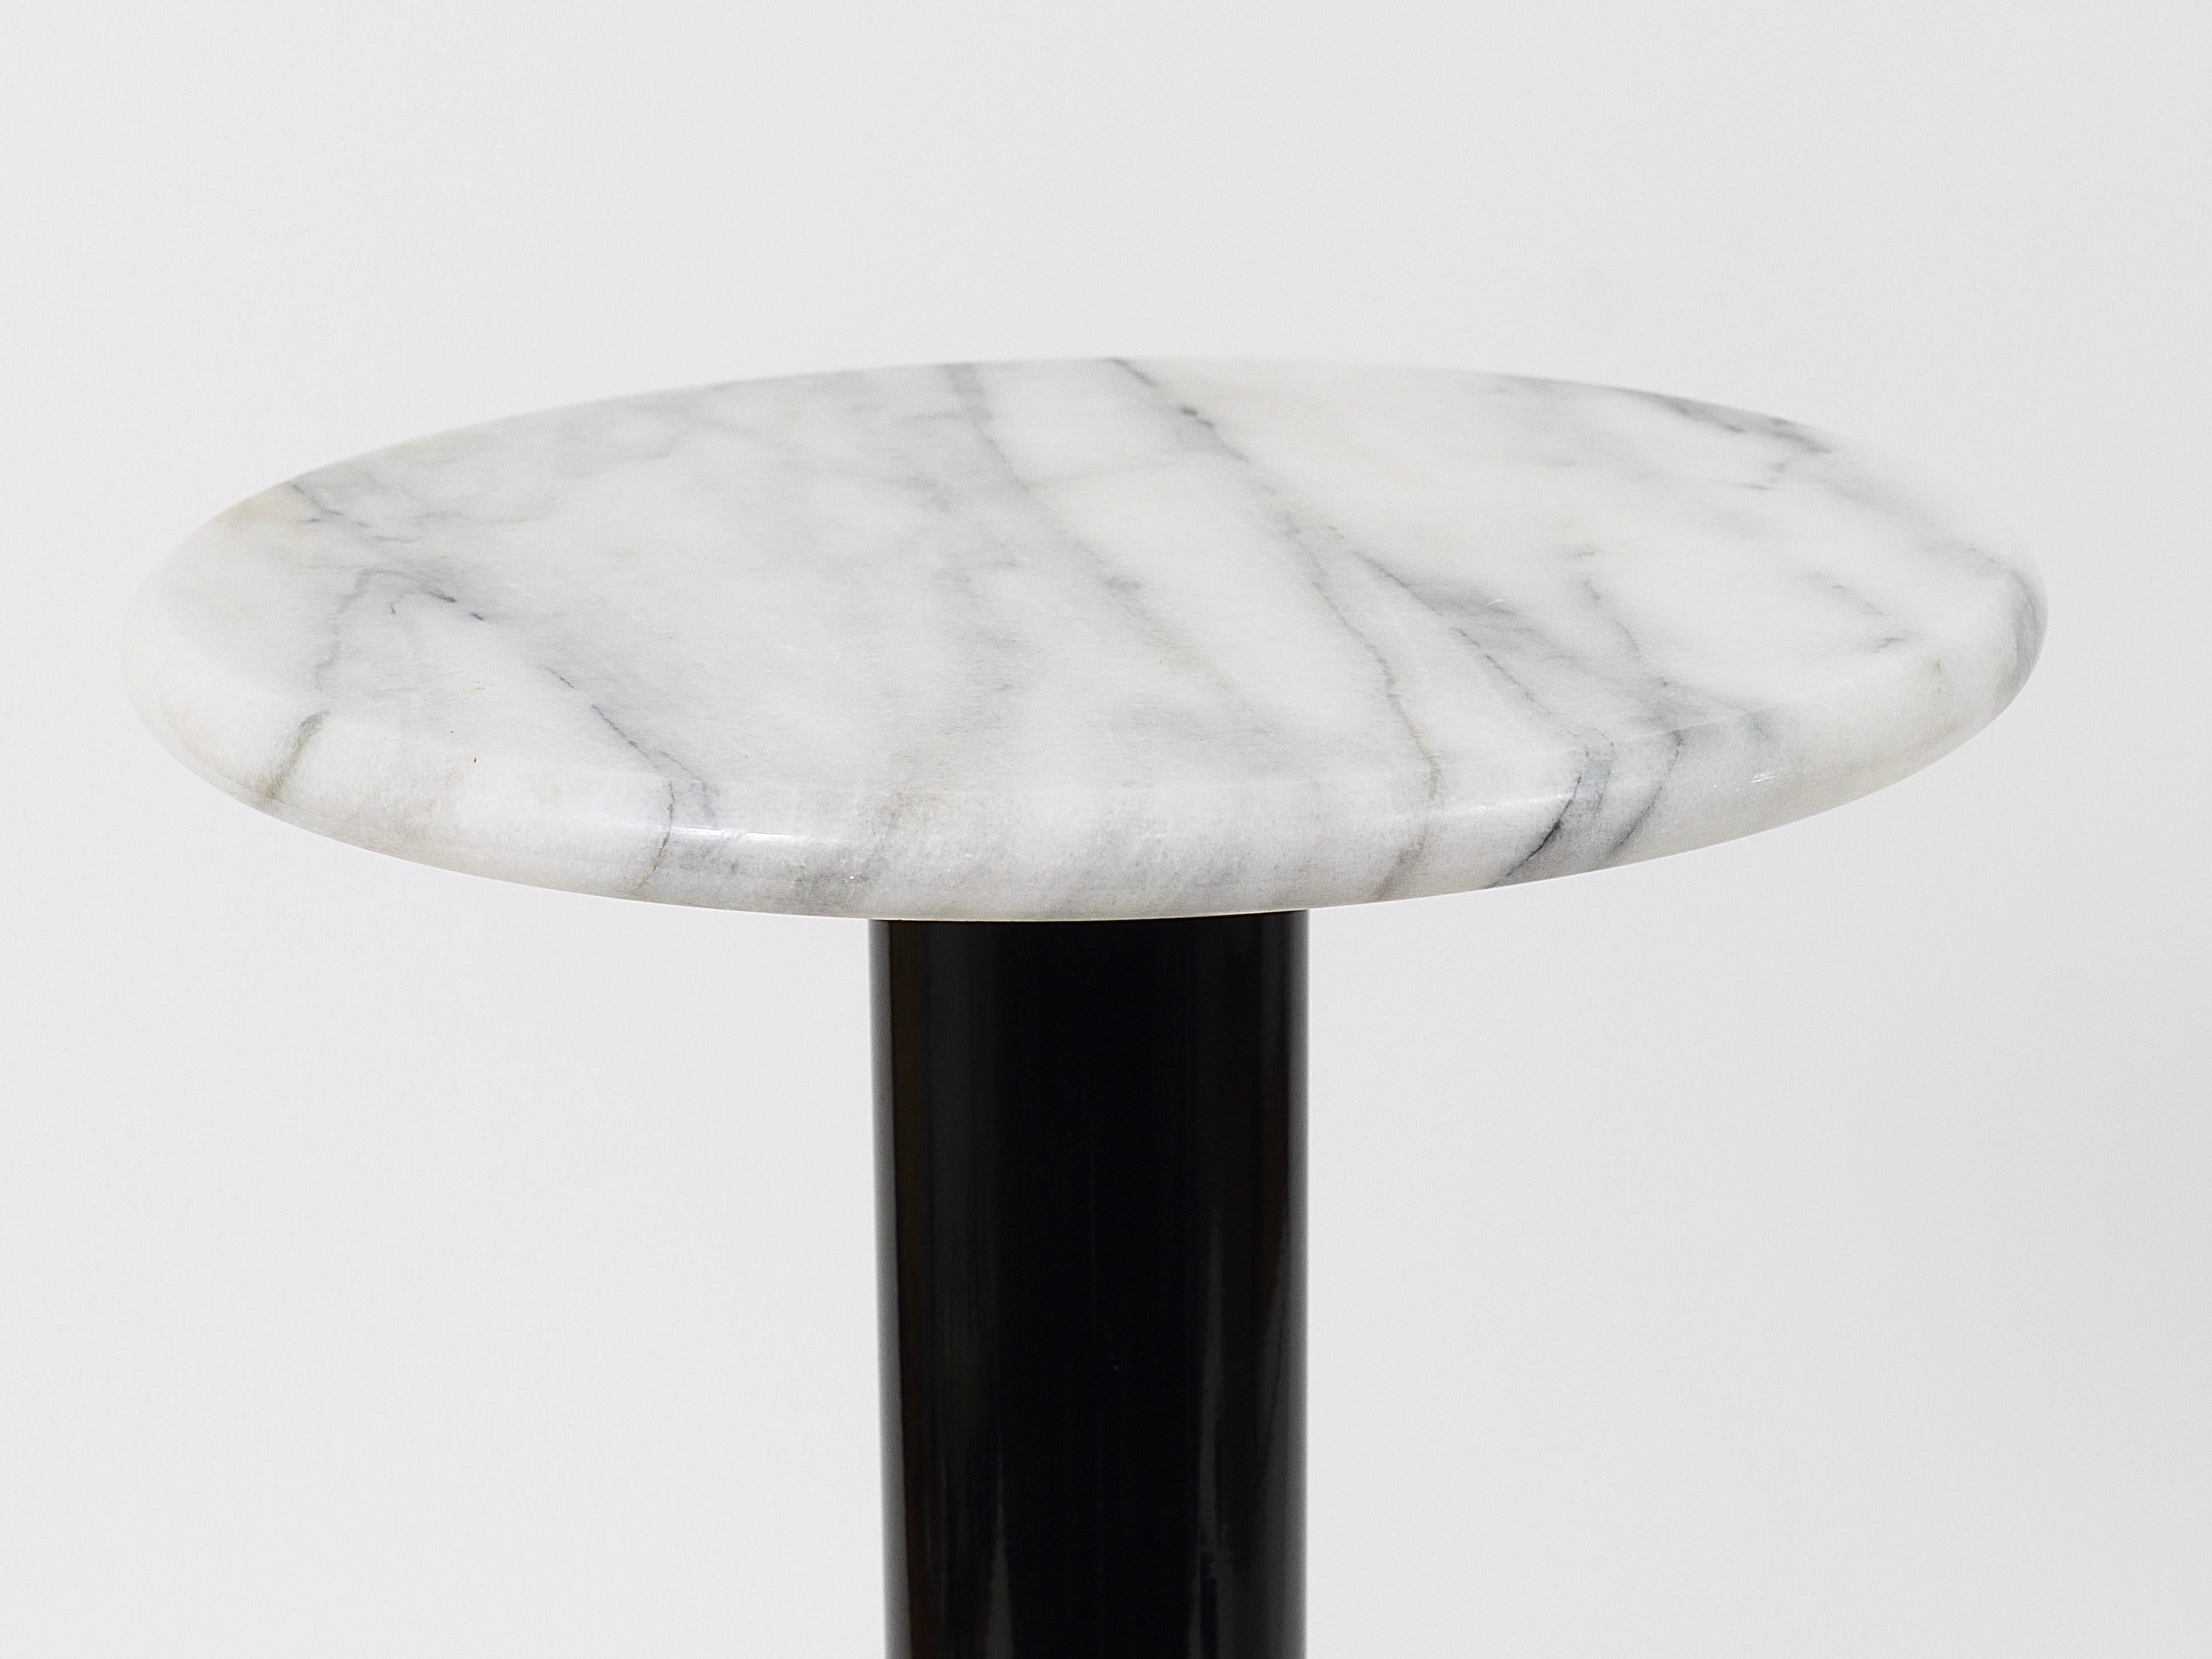 Postmodern White Carrara Marble Flower Stand Pedestal Table, Italy, 1980s For Sale 6